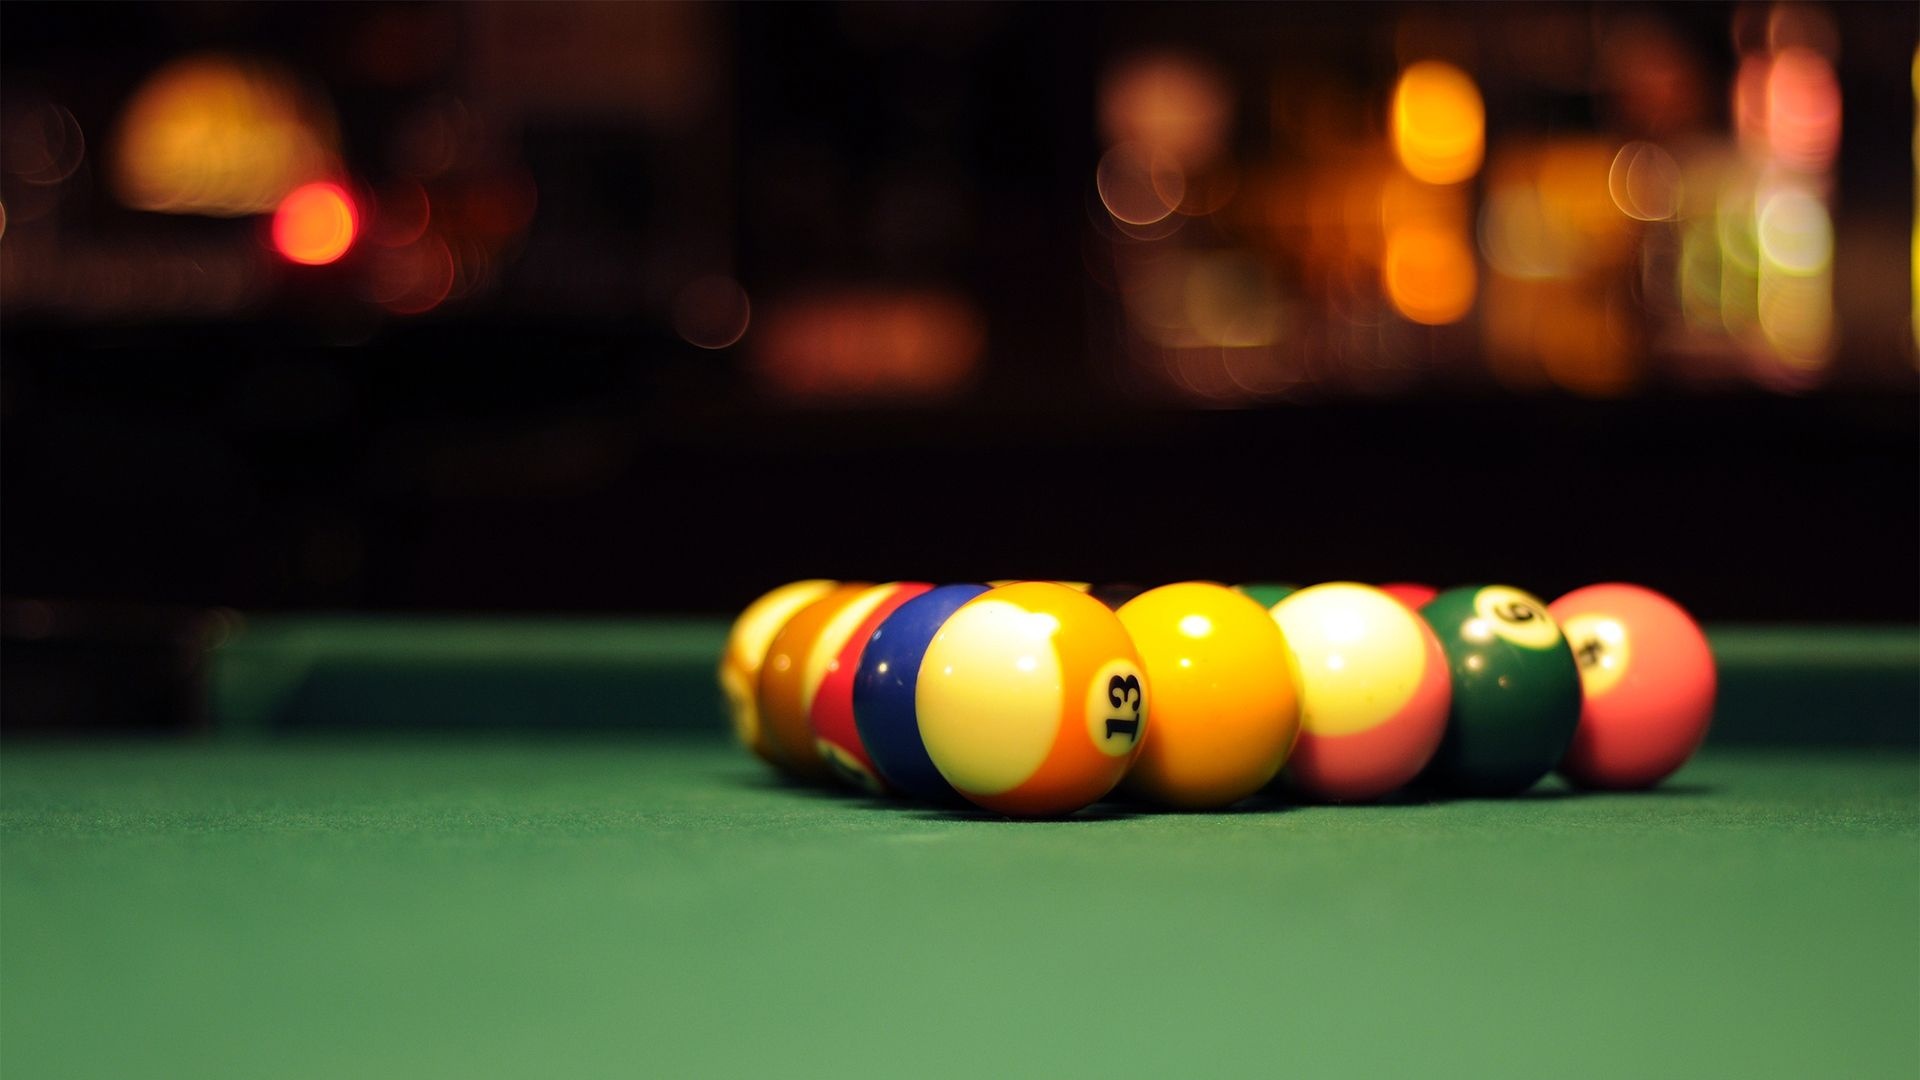 Pool (Cue Sports): Fifteen object balls - small solid numbered balls used in a classic American eight-ball game. 1920x1080 Full HD Background.